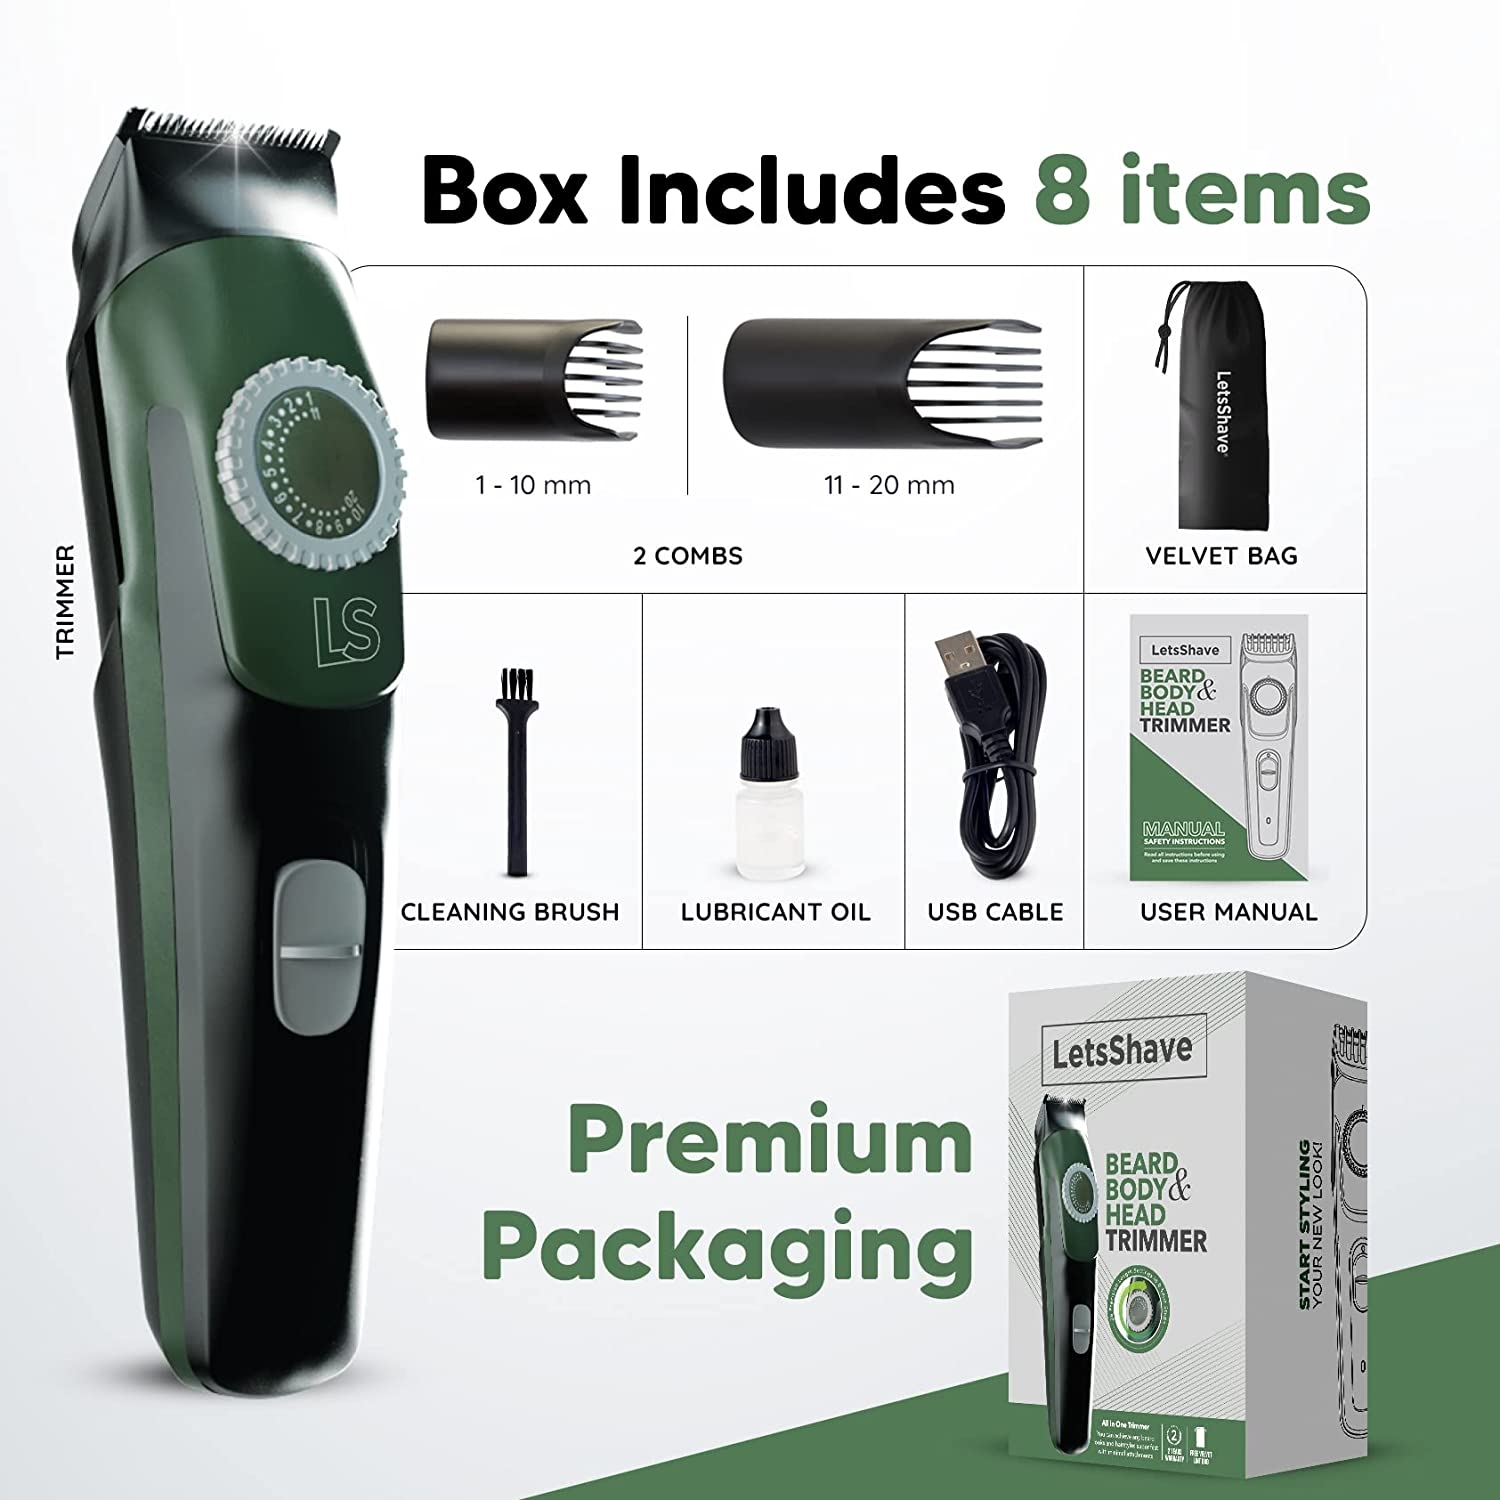 LetsShave | LetsShave Beard, Body & Head Trimmer - Fast Charge, 38 Precision Length Setting, Cord & Cordless Usage 7